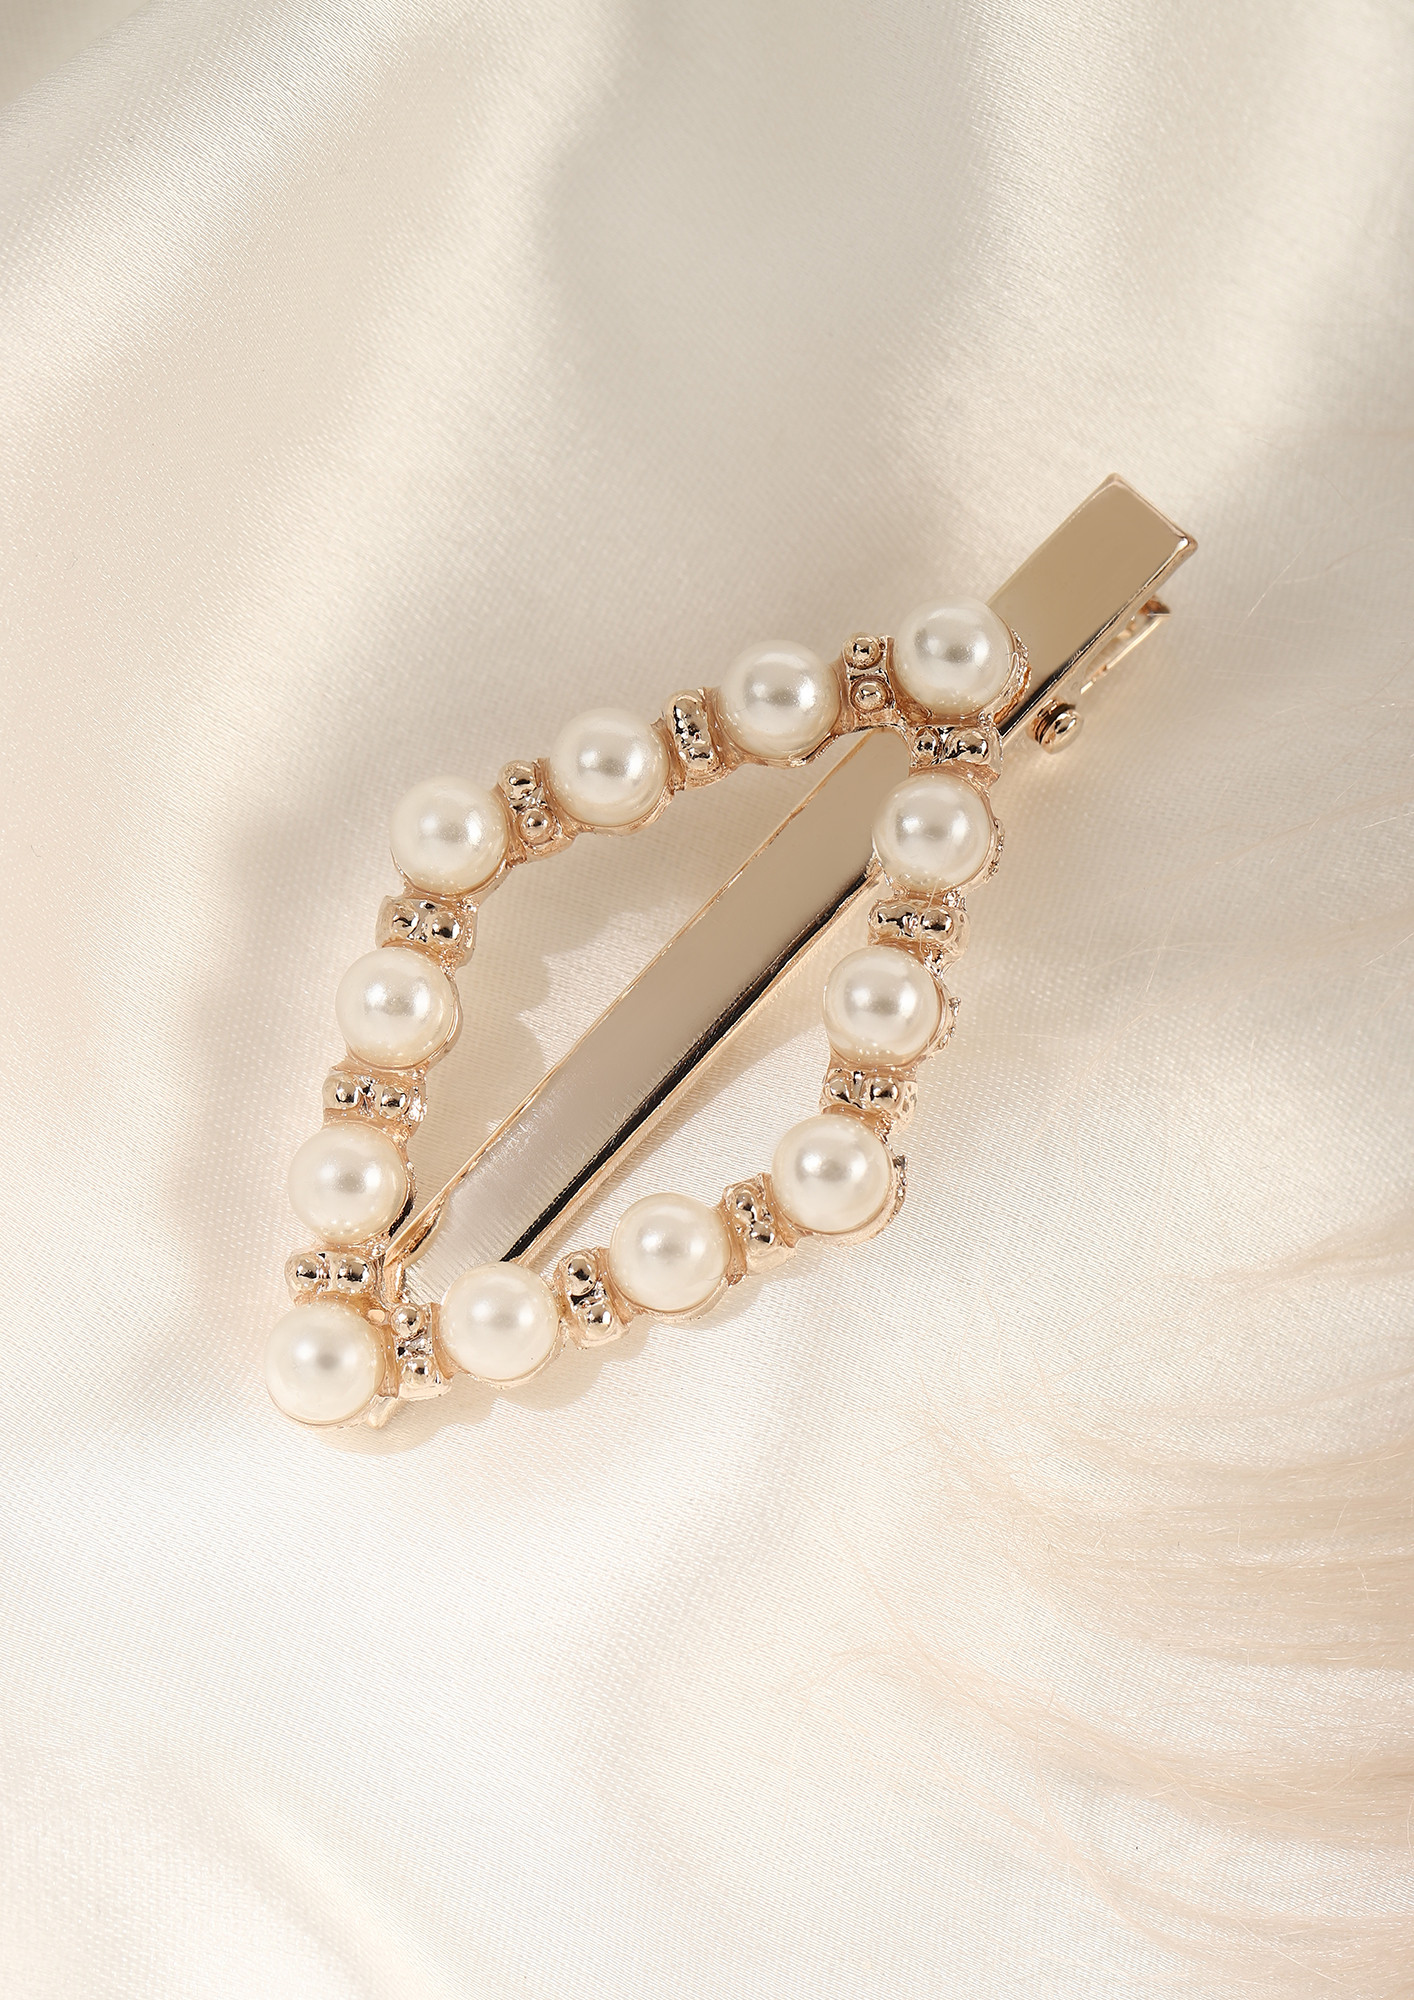 NEVER BLAME A PEARL IVORY HAIR CLIP